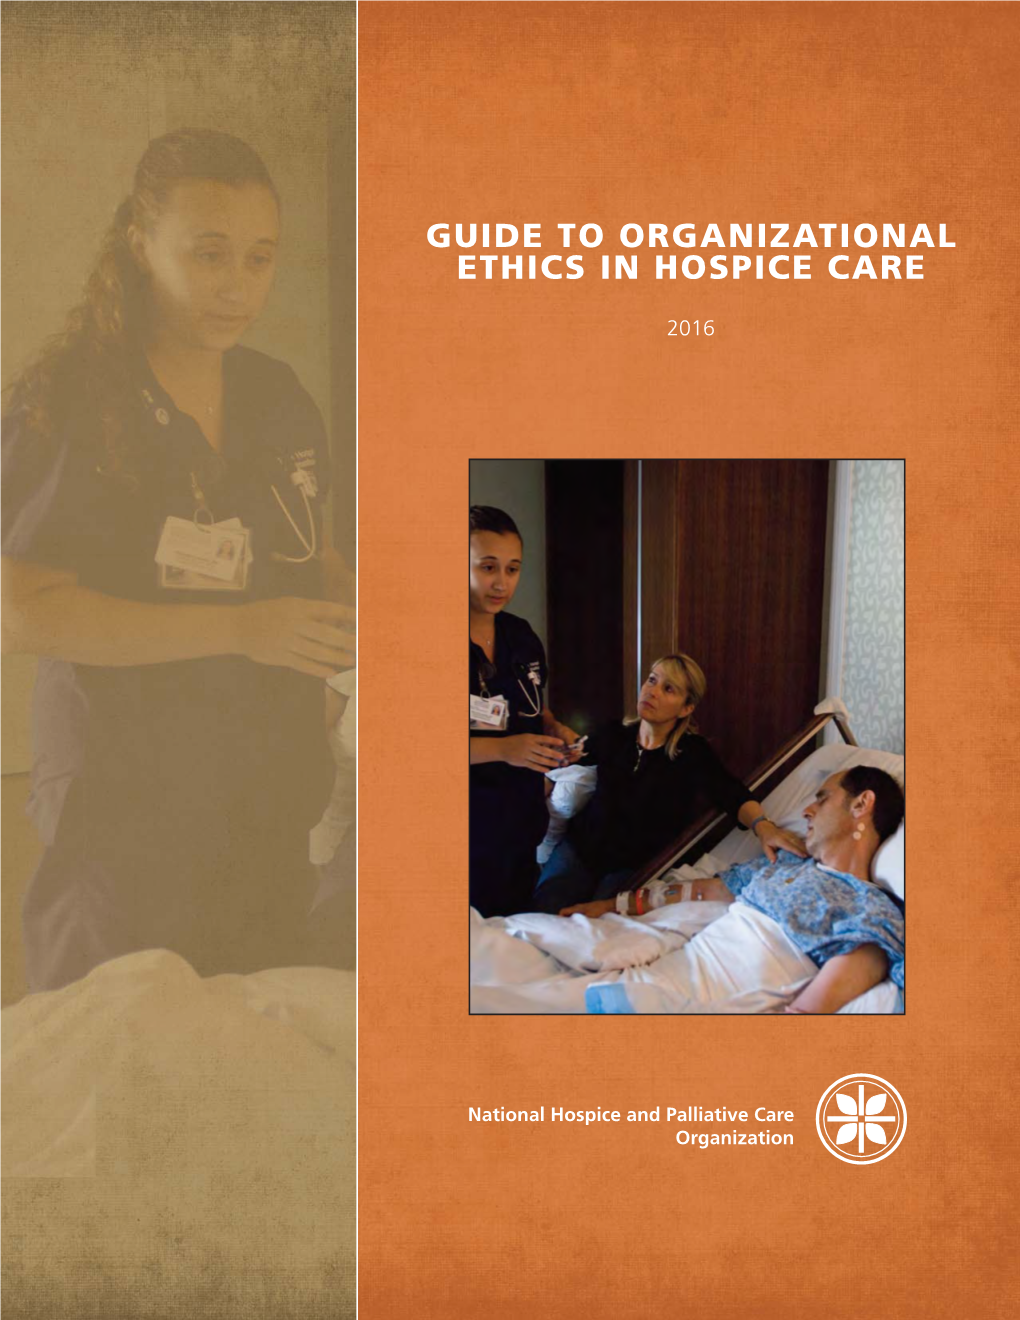 Guide to Organizational Ethics in Hospice Care